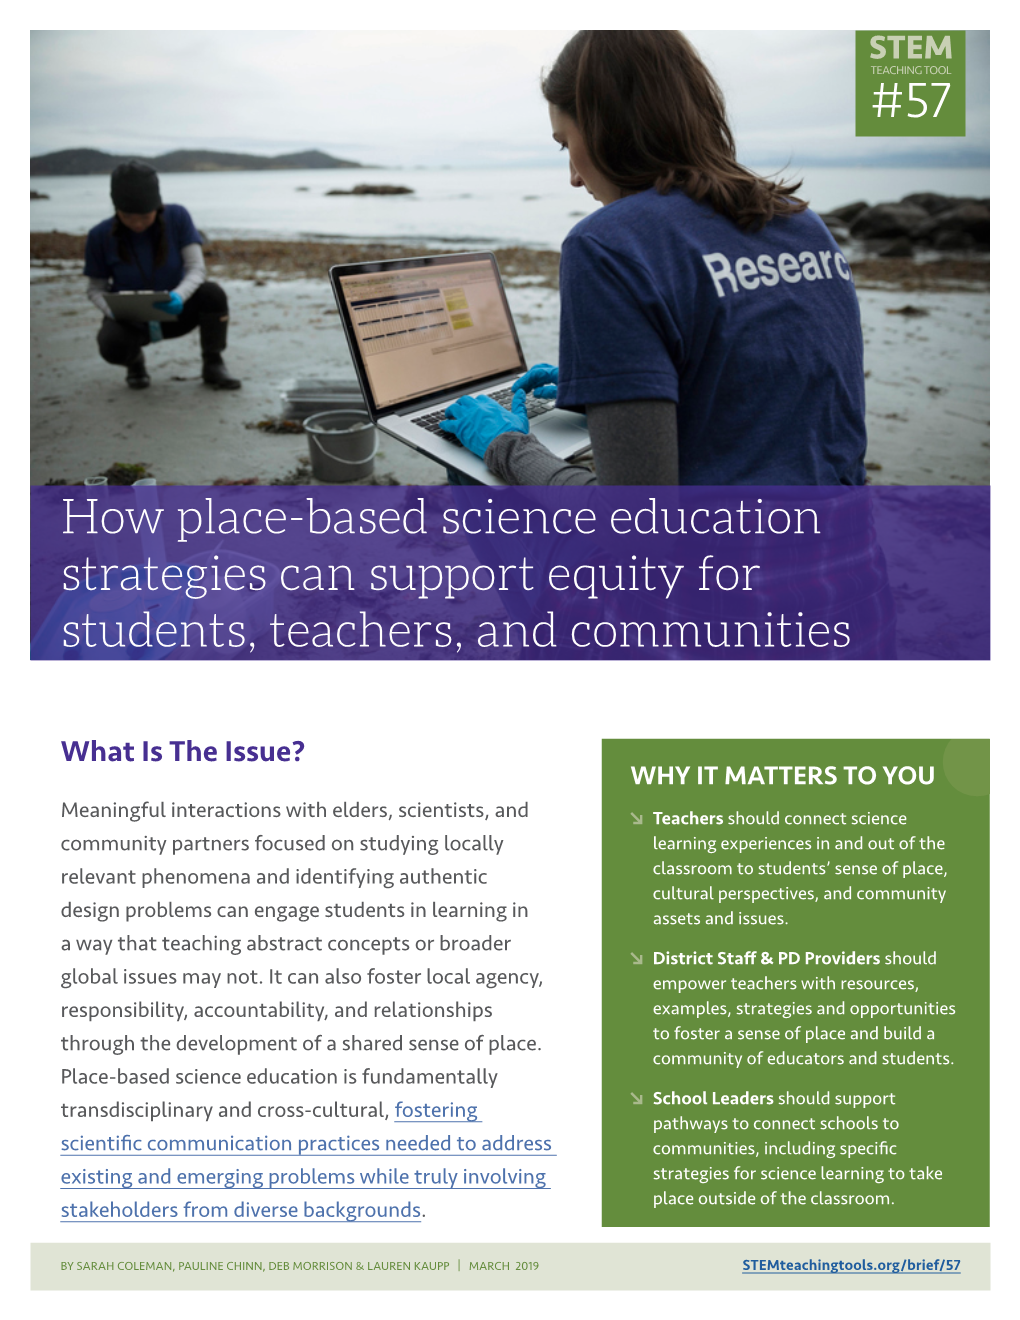 How Place-Based Science Education Strategies Can Support Equity for Students, Teachers, and Communities